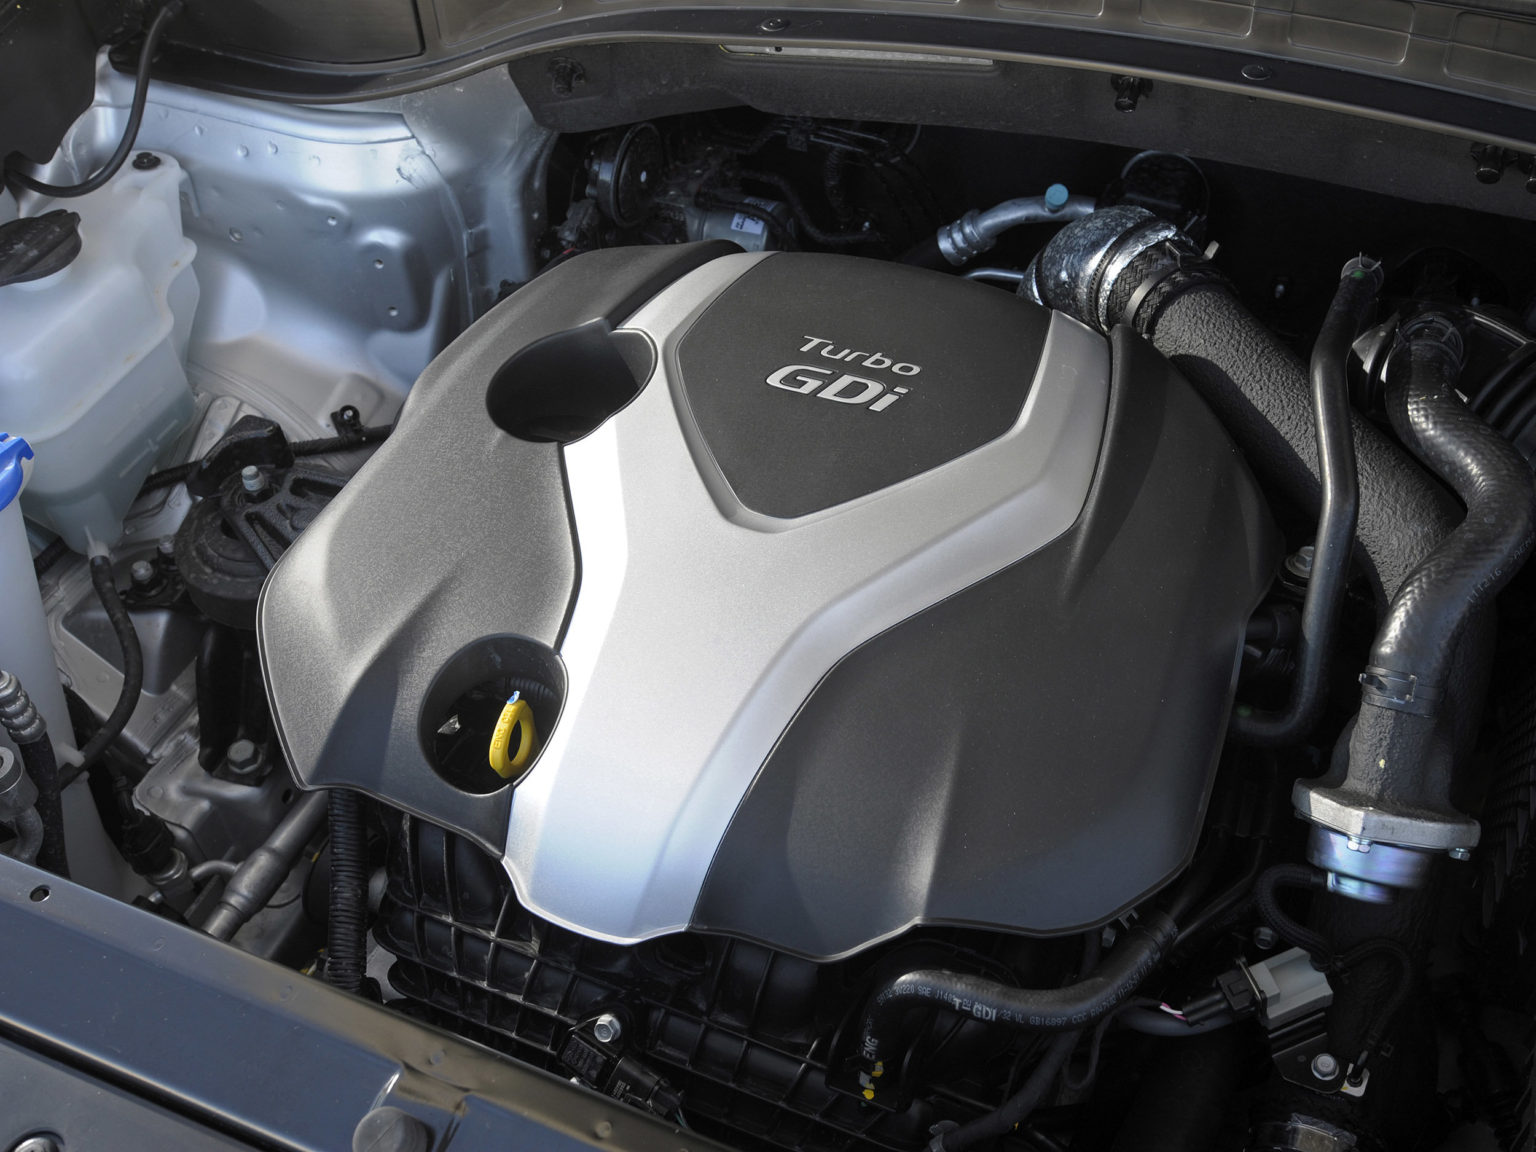 The Theta II engine, shown here in the 2013 Hyundai Santa Fe Sport, was the subject of a massive recall.